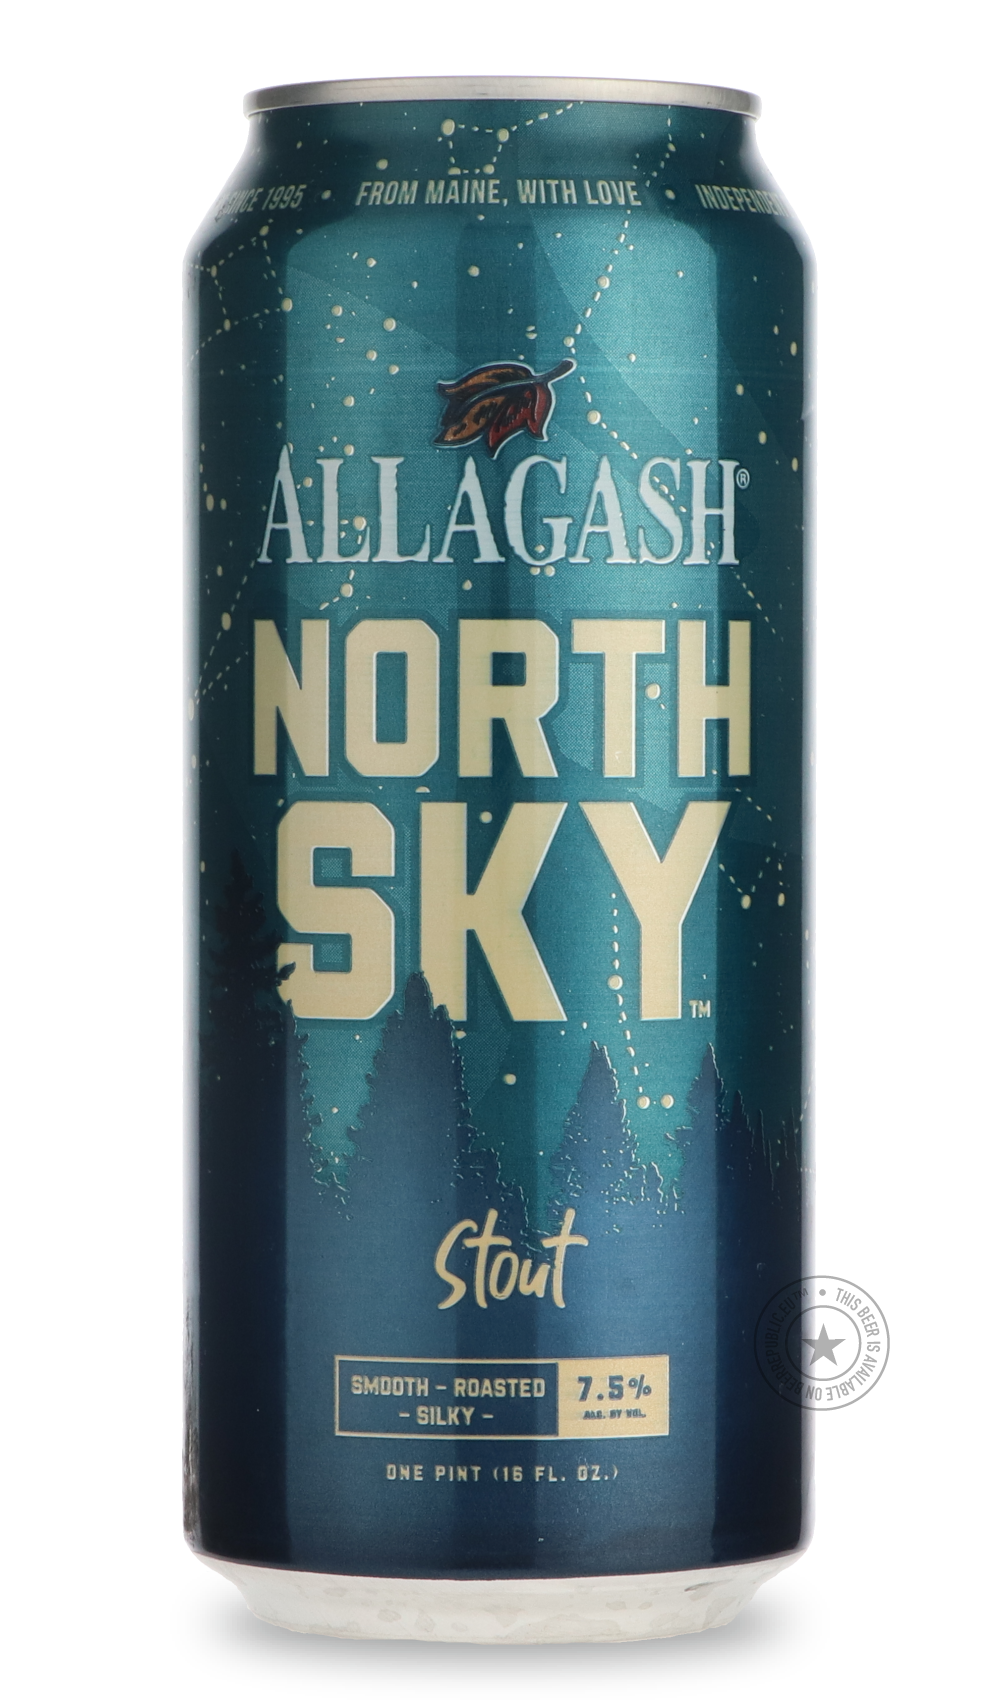 -Allagash- North Sky-Stout & Porter- Only @ Beer Republic - The best online beer store for American & Canadian craft beer - Buy beer online from the USA and Canada - Bier online kopen - Amerikaans bier kopen - Craft beer store - Craft beer kopen - Amerikanisch bier kaufen - Bier online kaufen - Acheter biere online - IPA - Stout - Porter - New England IPA - Hazy IPA - Imperial Stout - Barrel Aged - Barrel Aged Imperial Stout - Brown - Dark beer - Blond - Blonde - Pilsner - Lager - Wheat - Weizen - Amber - B